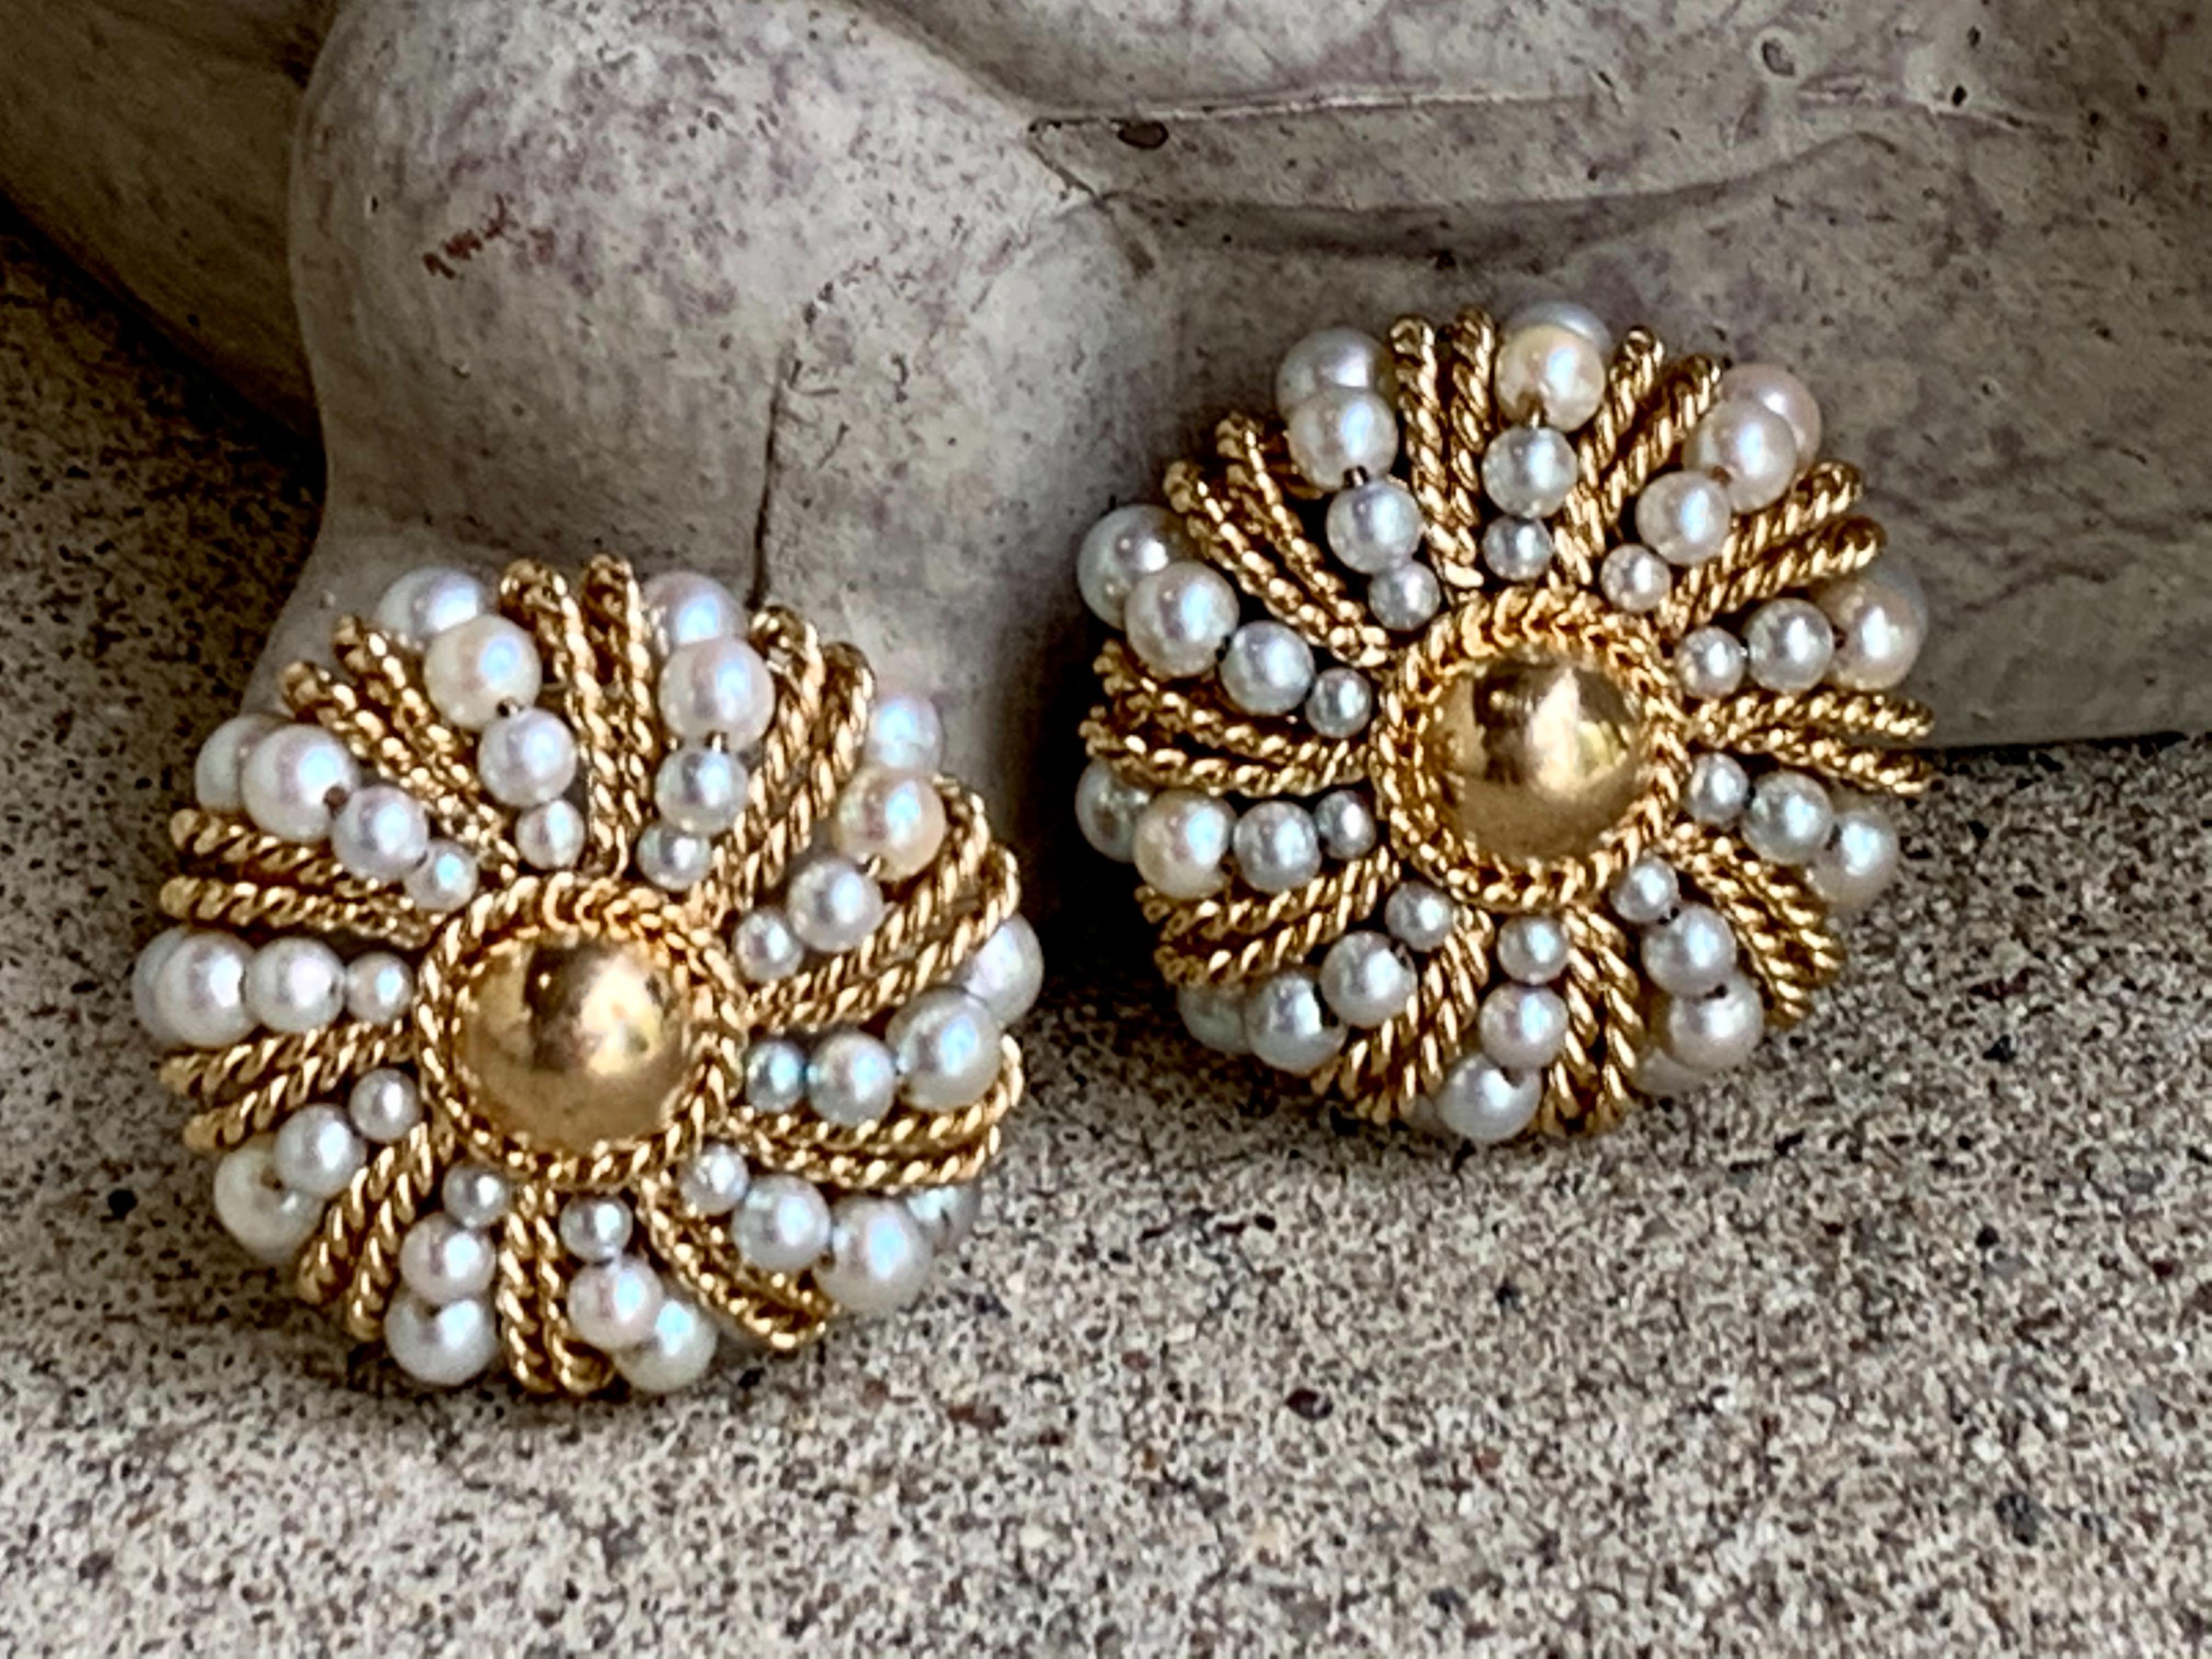 These stunning earrings feature 40 Pearls of various sizes, grouped together in a round cluster; they are strung together with 14 karat yellow Gold and feature 